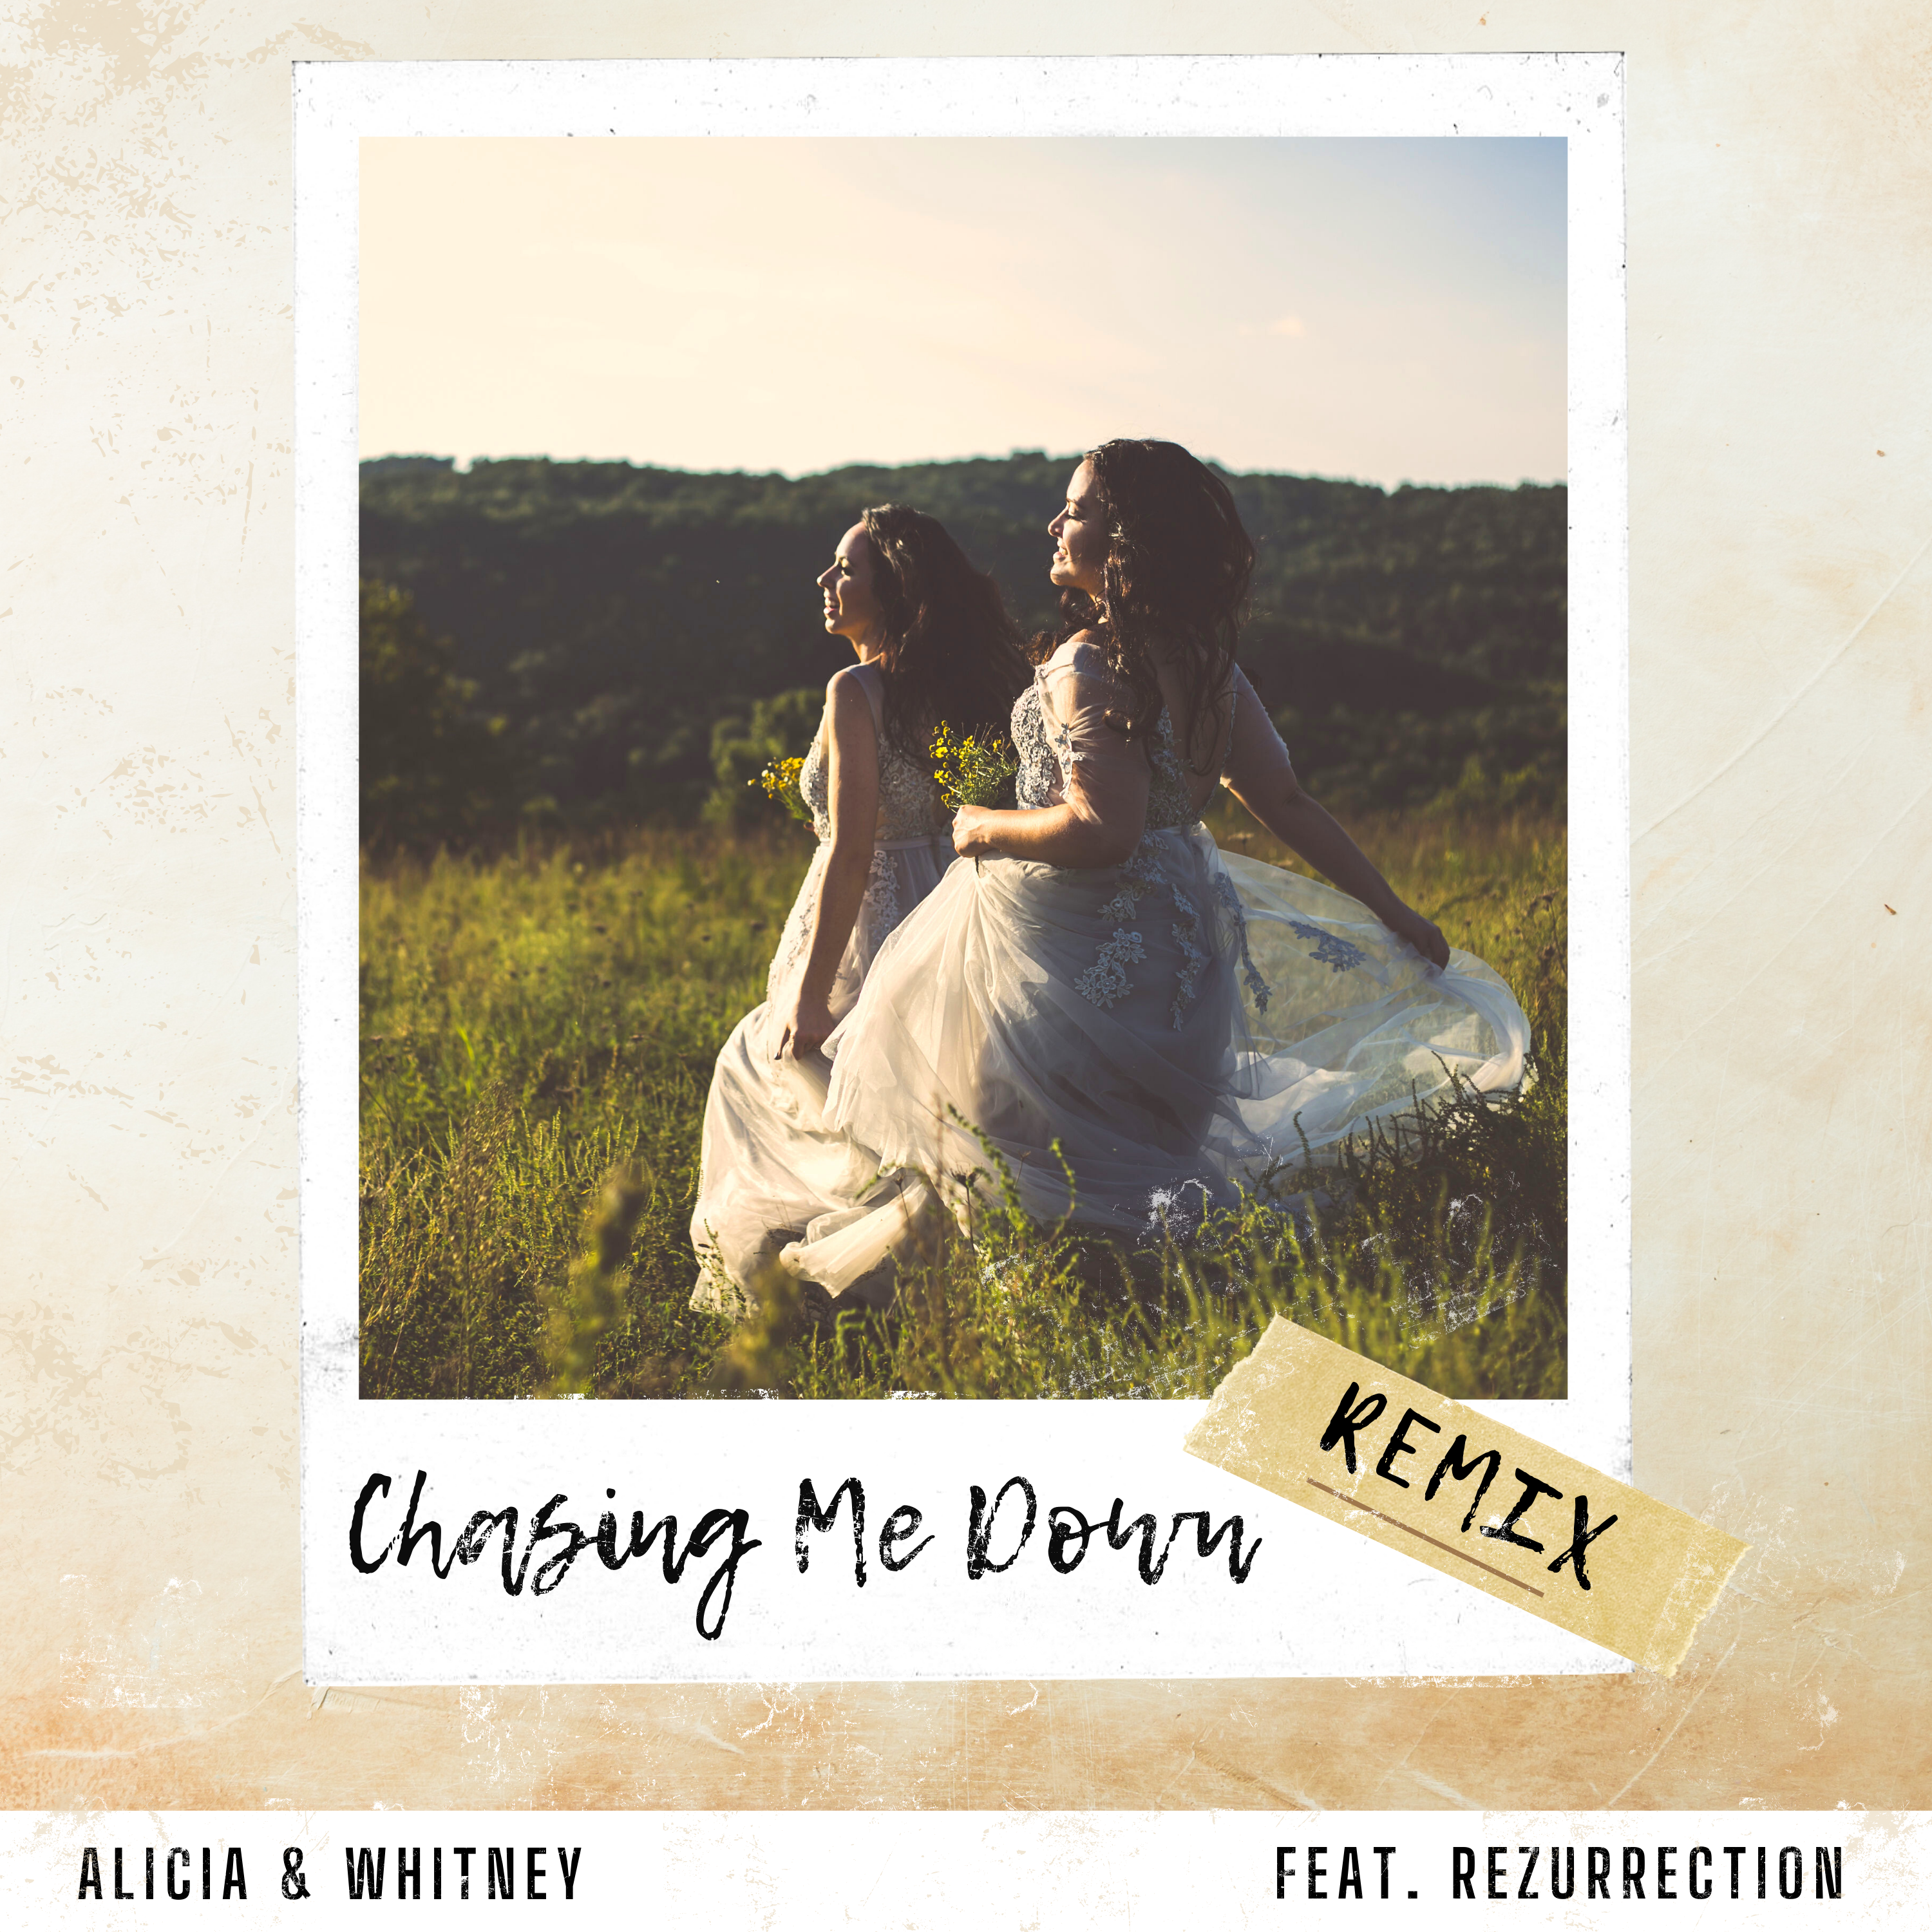 NEW REMIX SINGLE OUT TODAY FROM ALICIA & WHITNEY